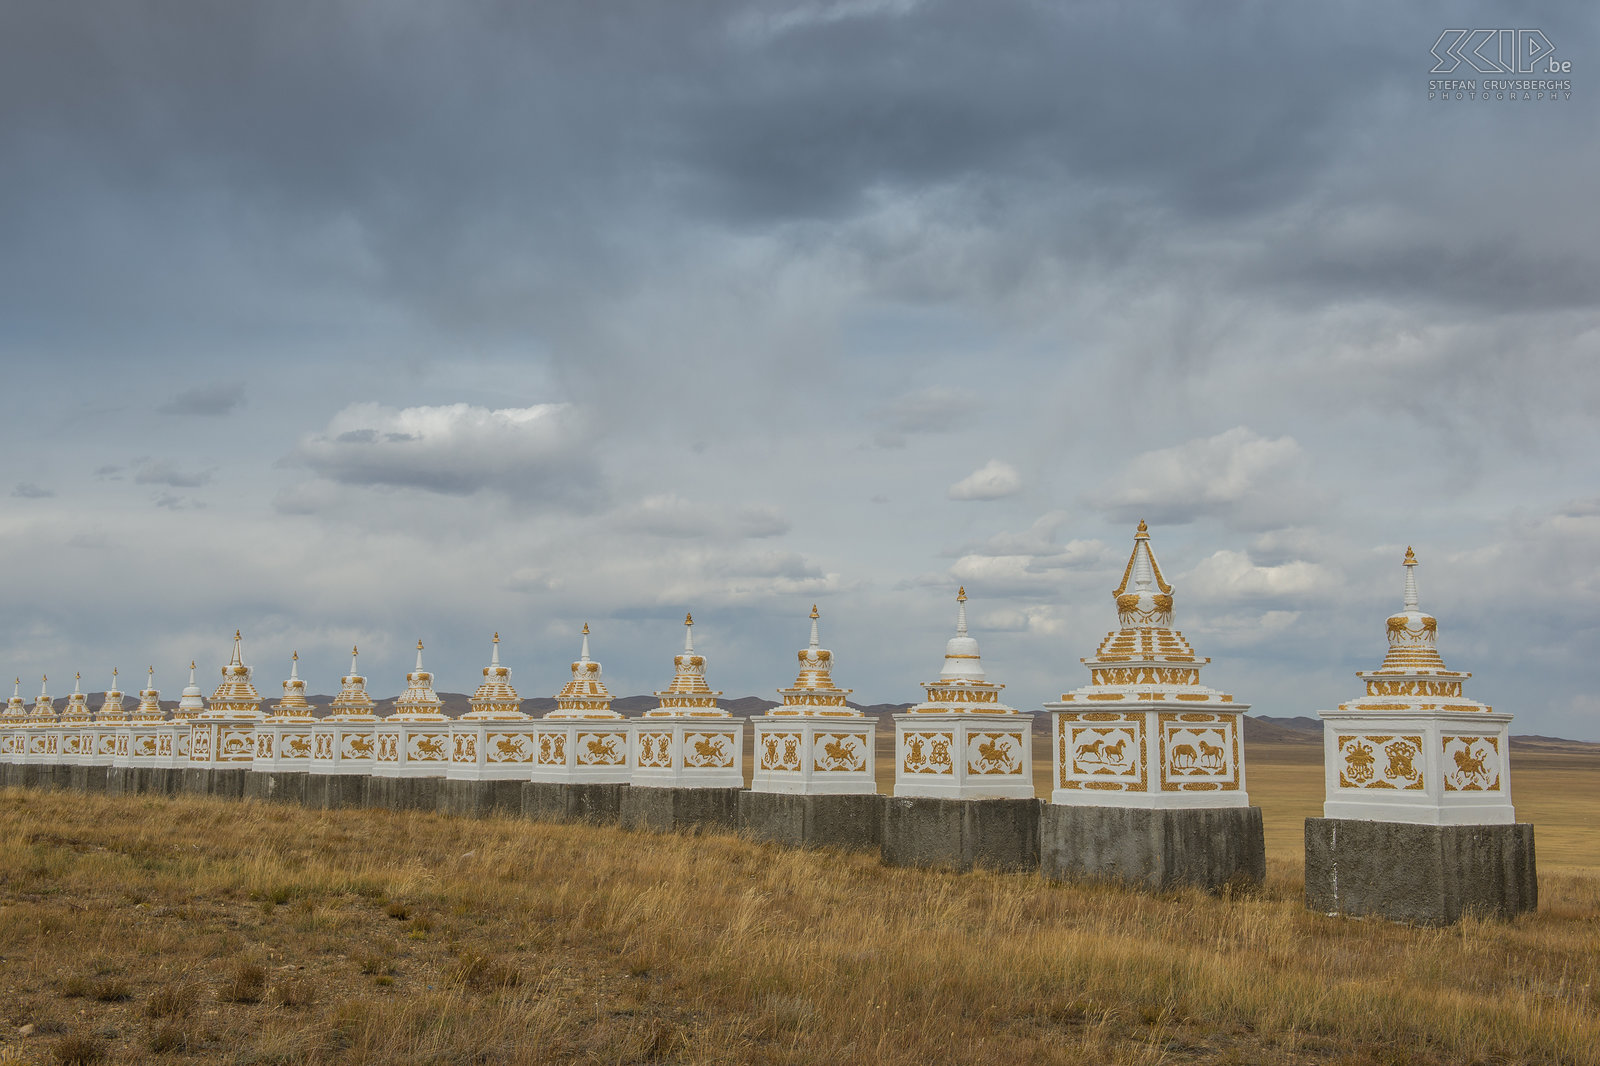 Arvaikheer - Horse memorial monument The horse memorial ‘Morin Tolgoe’ with its 108 stupas near the city of Arvaikheer. Stefan Cruysberghs